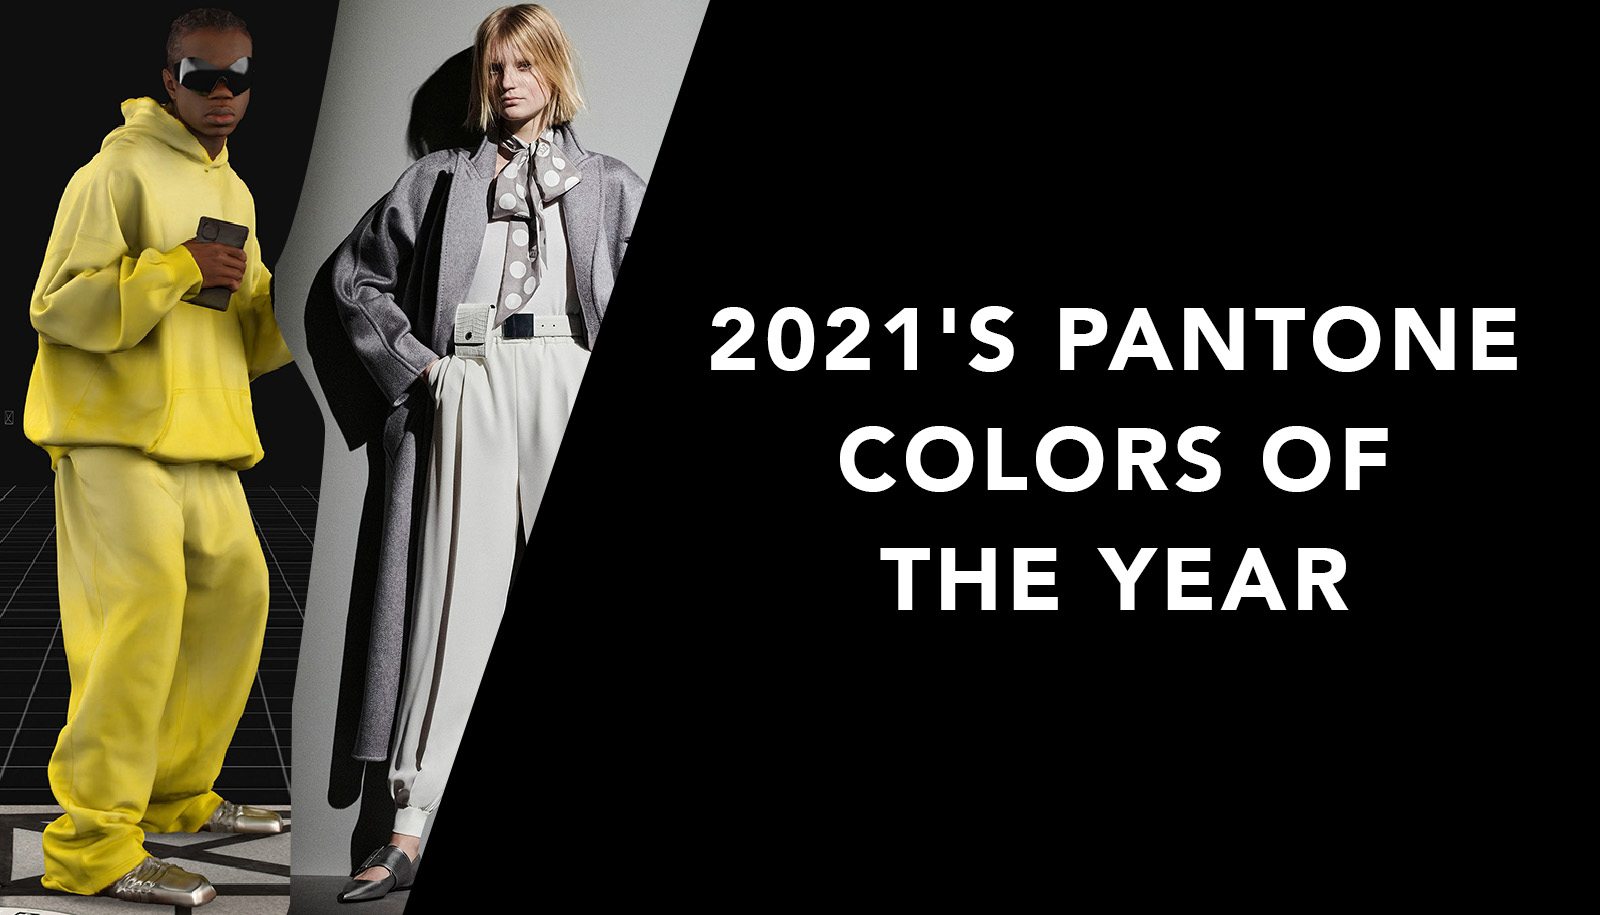 2021 Pantone Colors of the Year